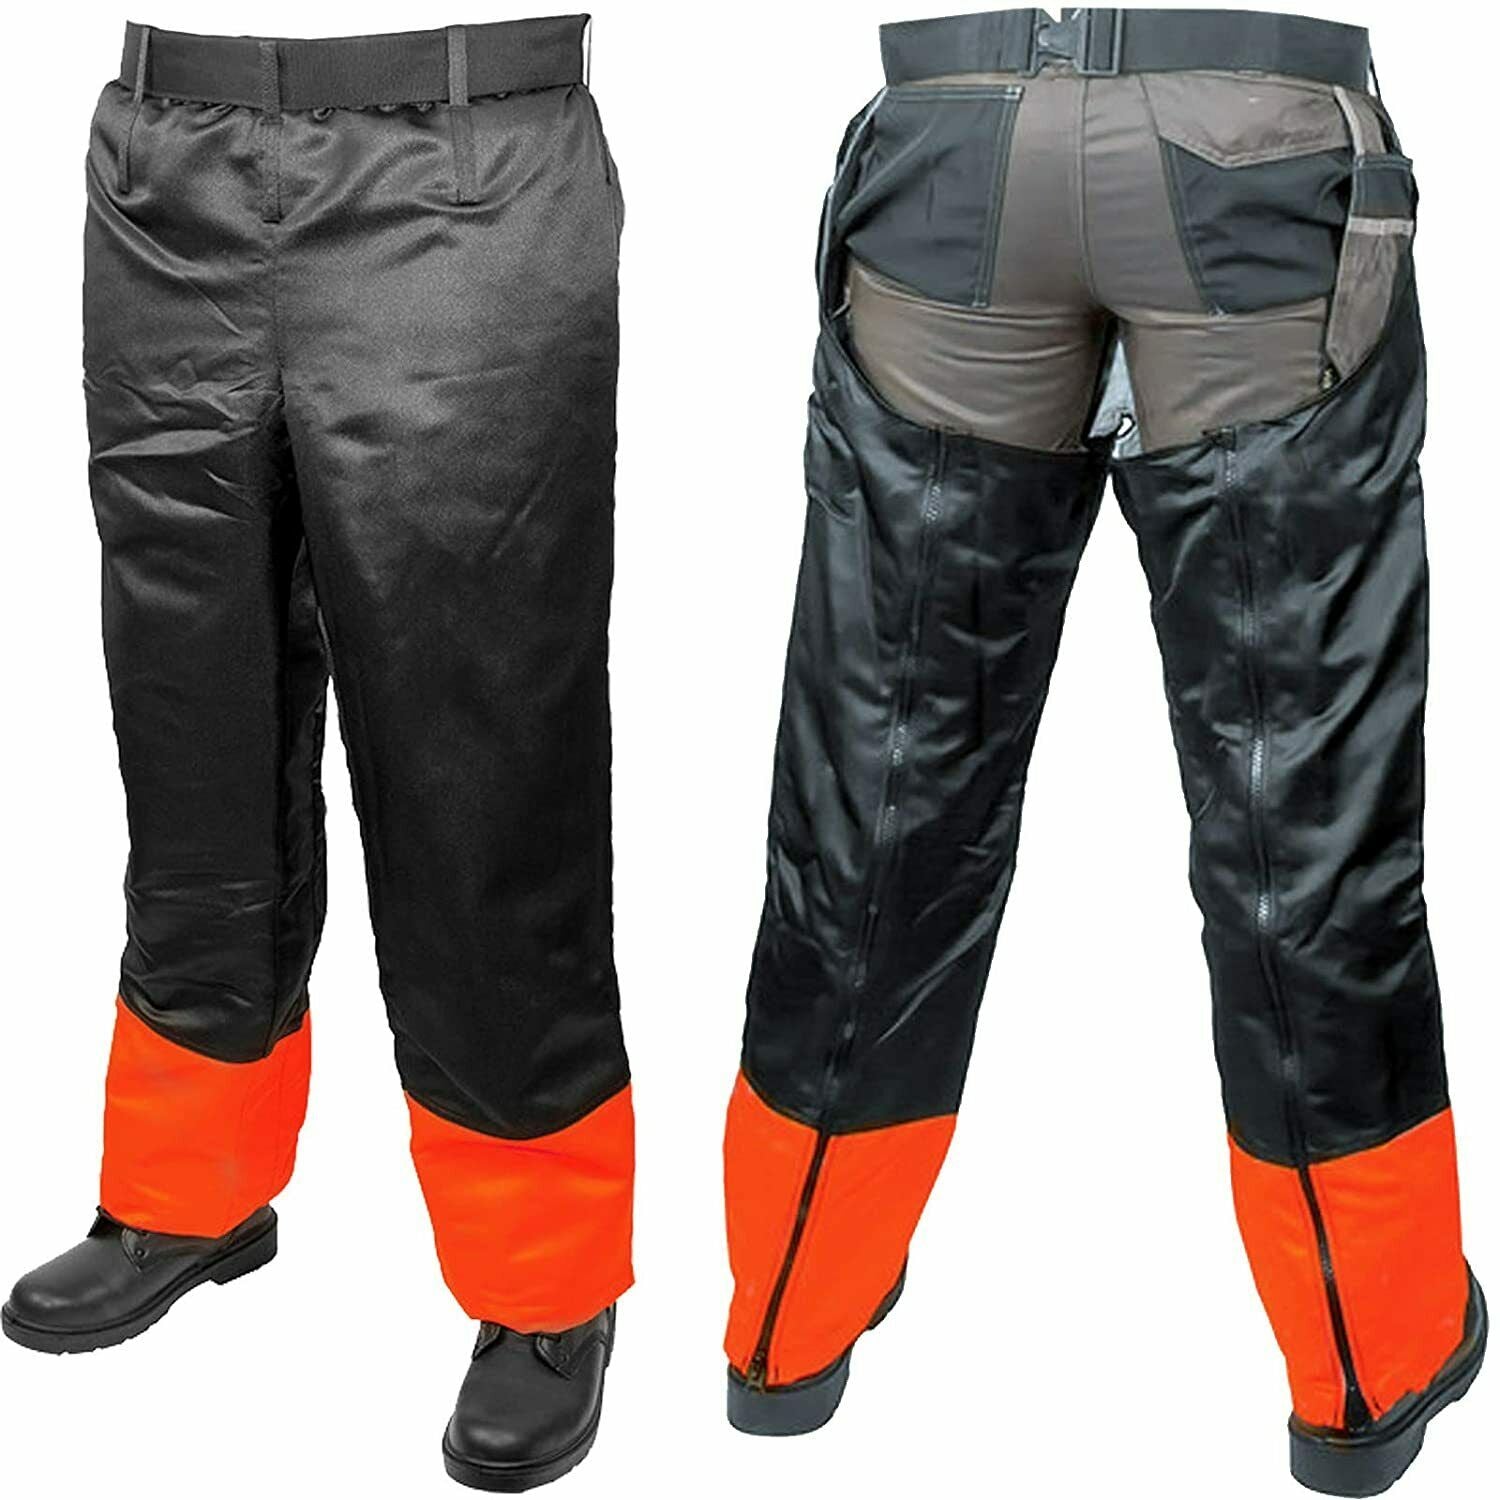 Chainsaw Trousers Chaps Adjustable 31-42" Forestry Safety Protective